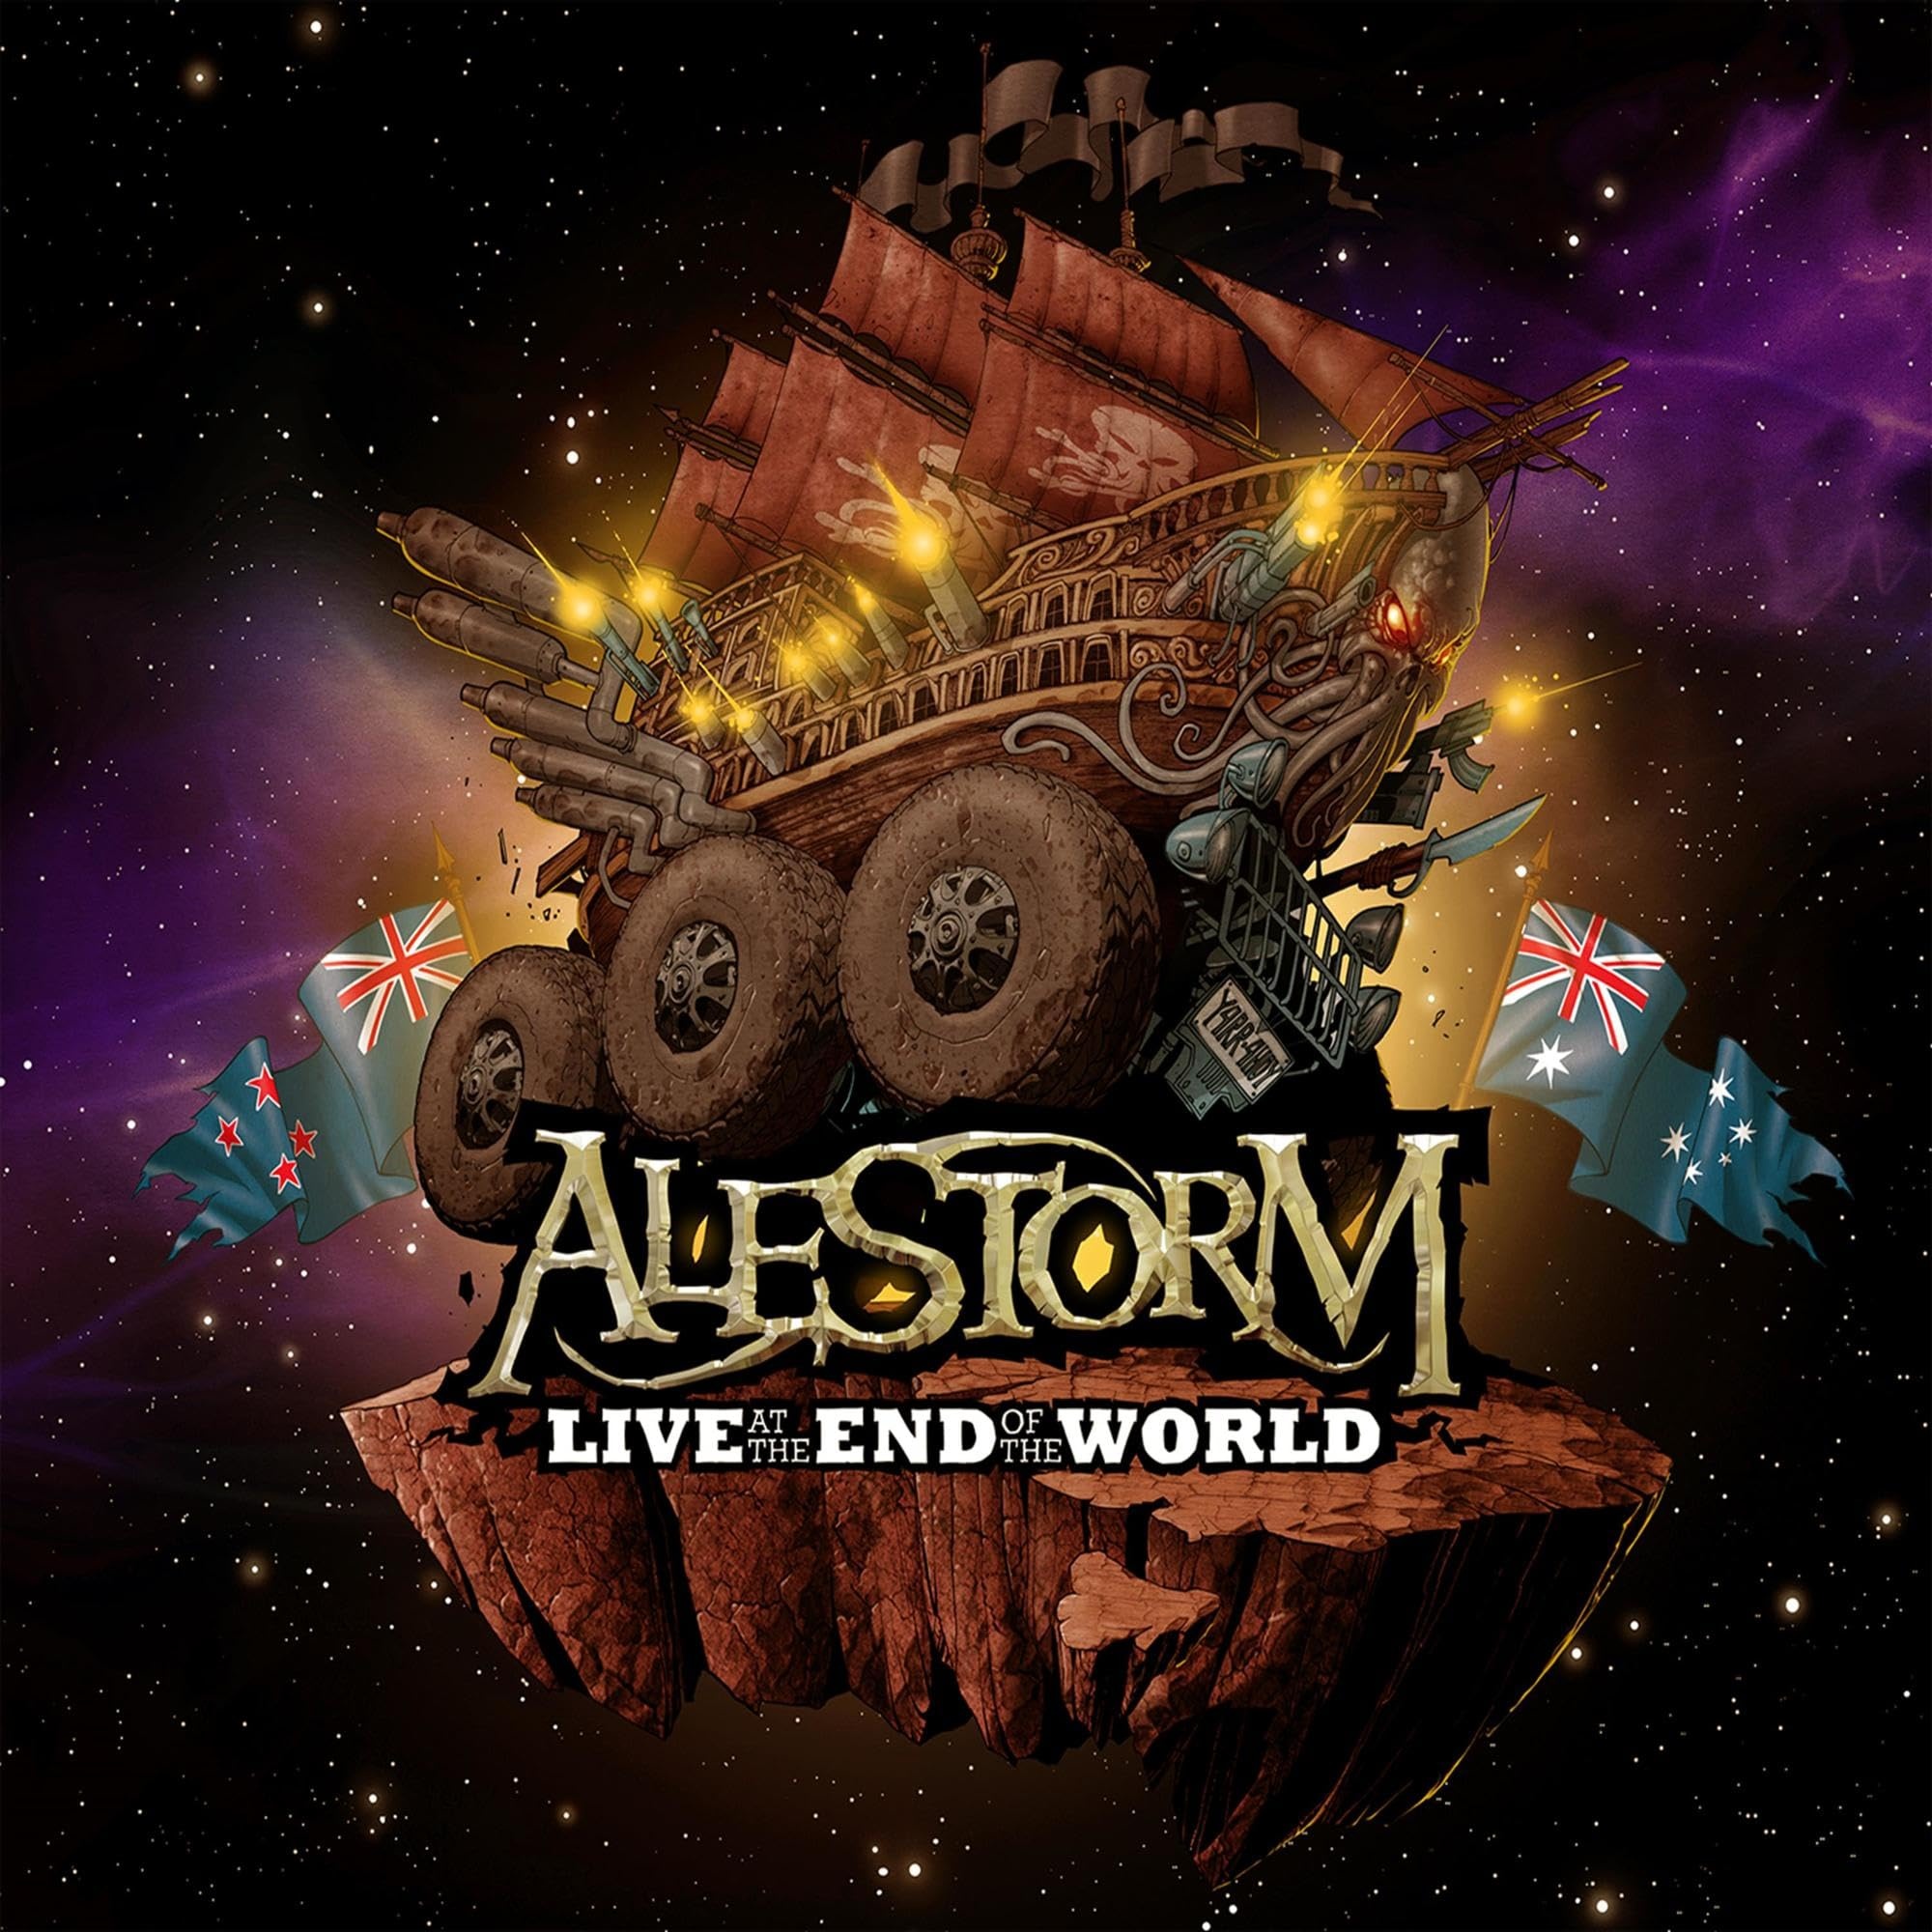 Live - at the End of the World (DVD + Bonus-CD) [HD DVD]